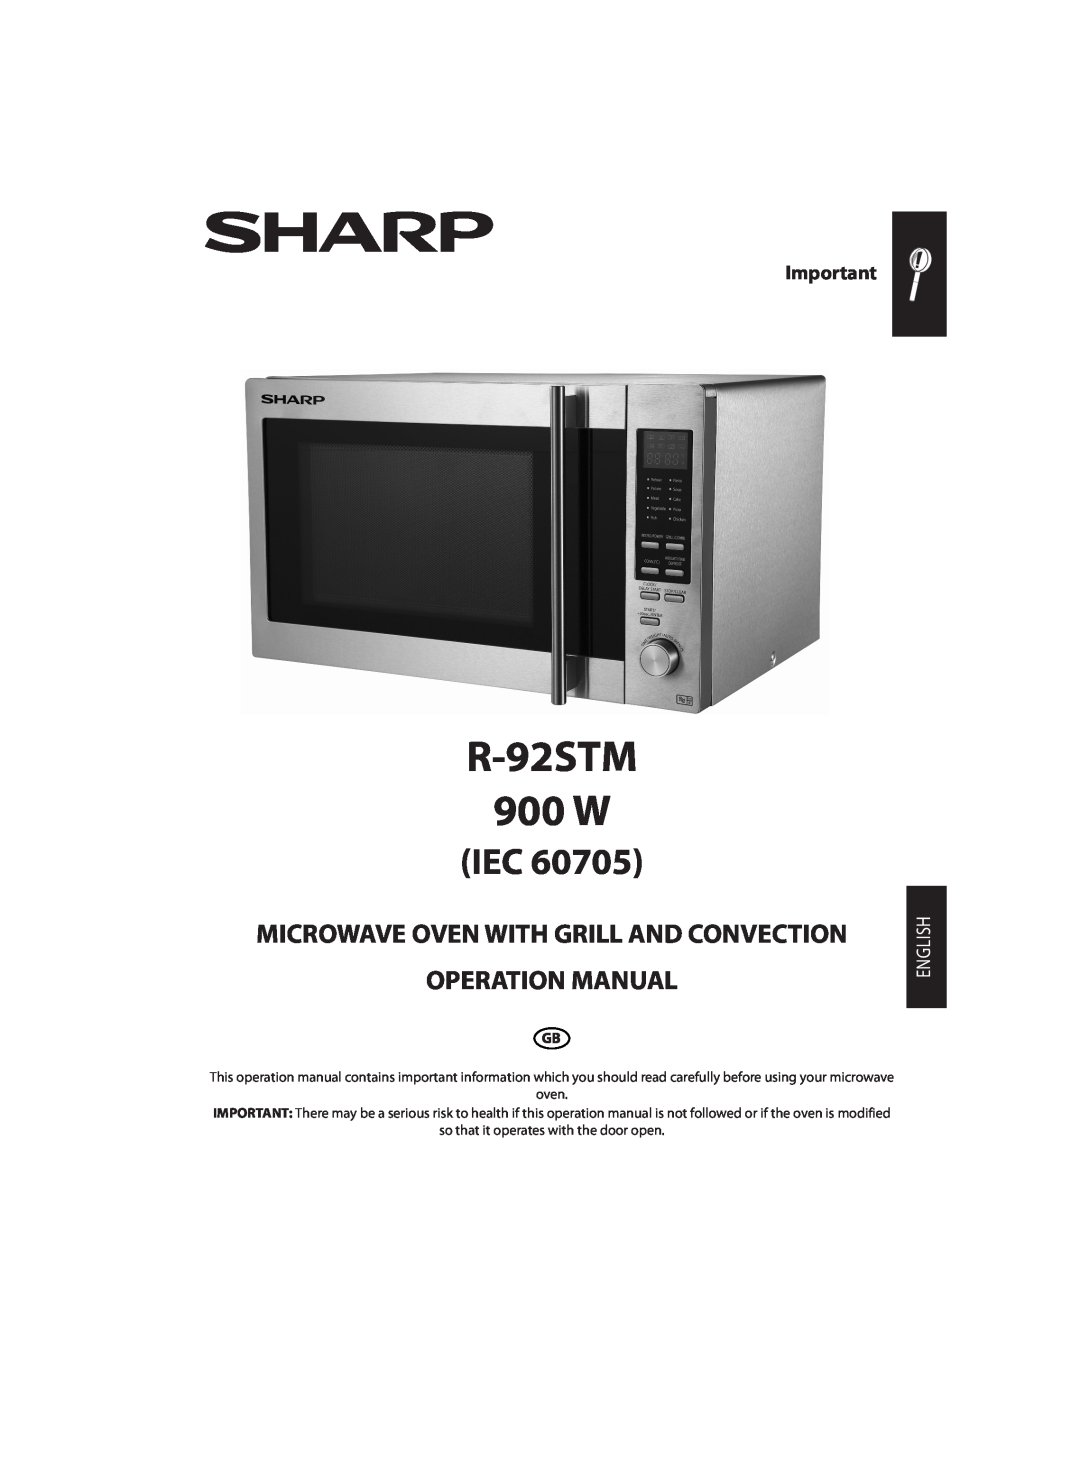 Sharp operation manual R-92STM 900 W, Microwave Oven With Grill And Convection, English 